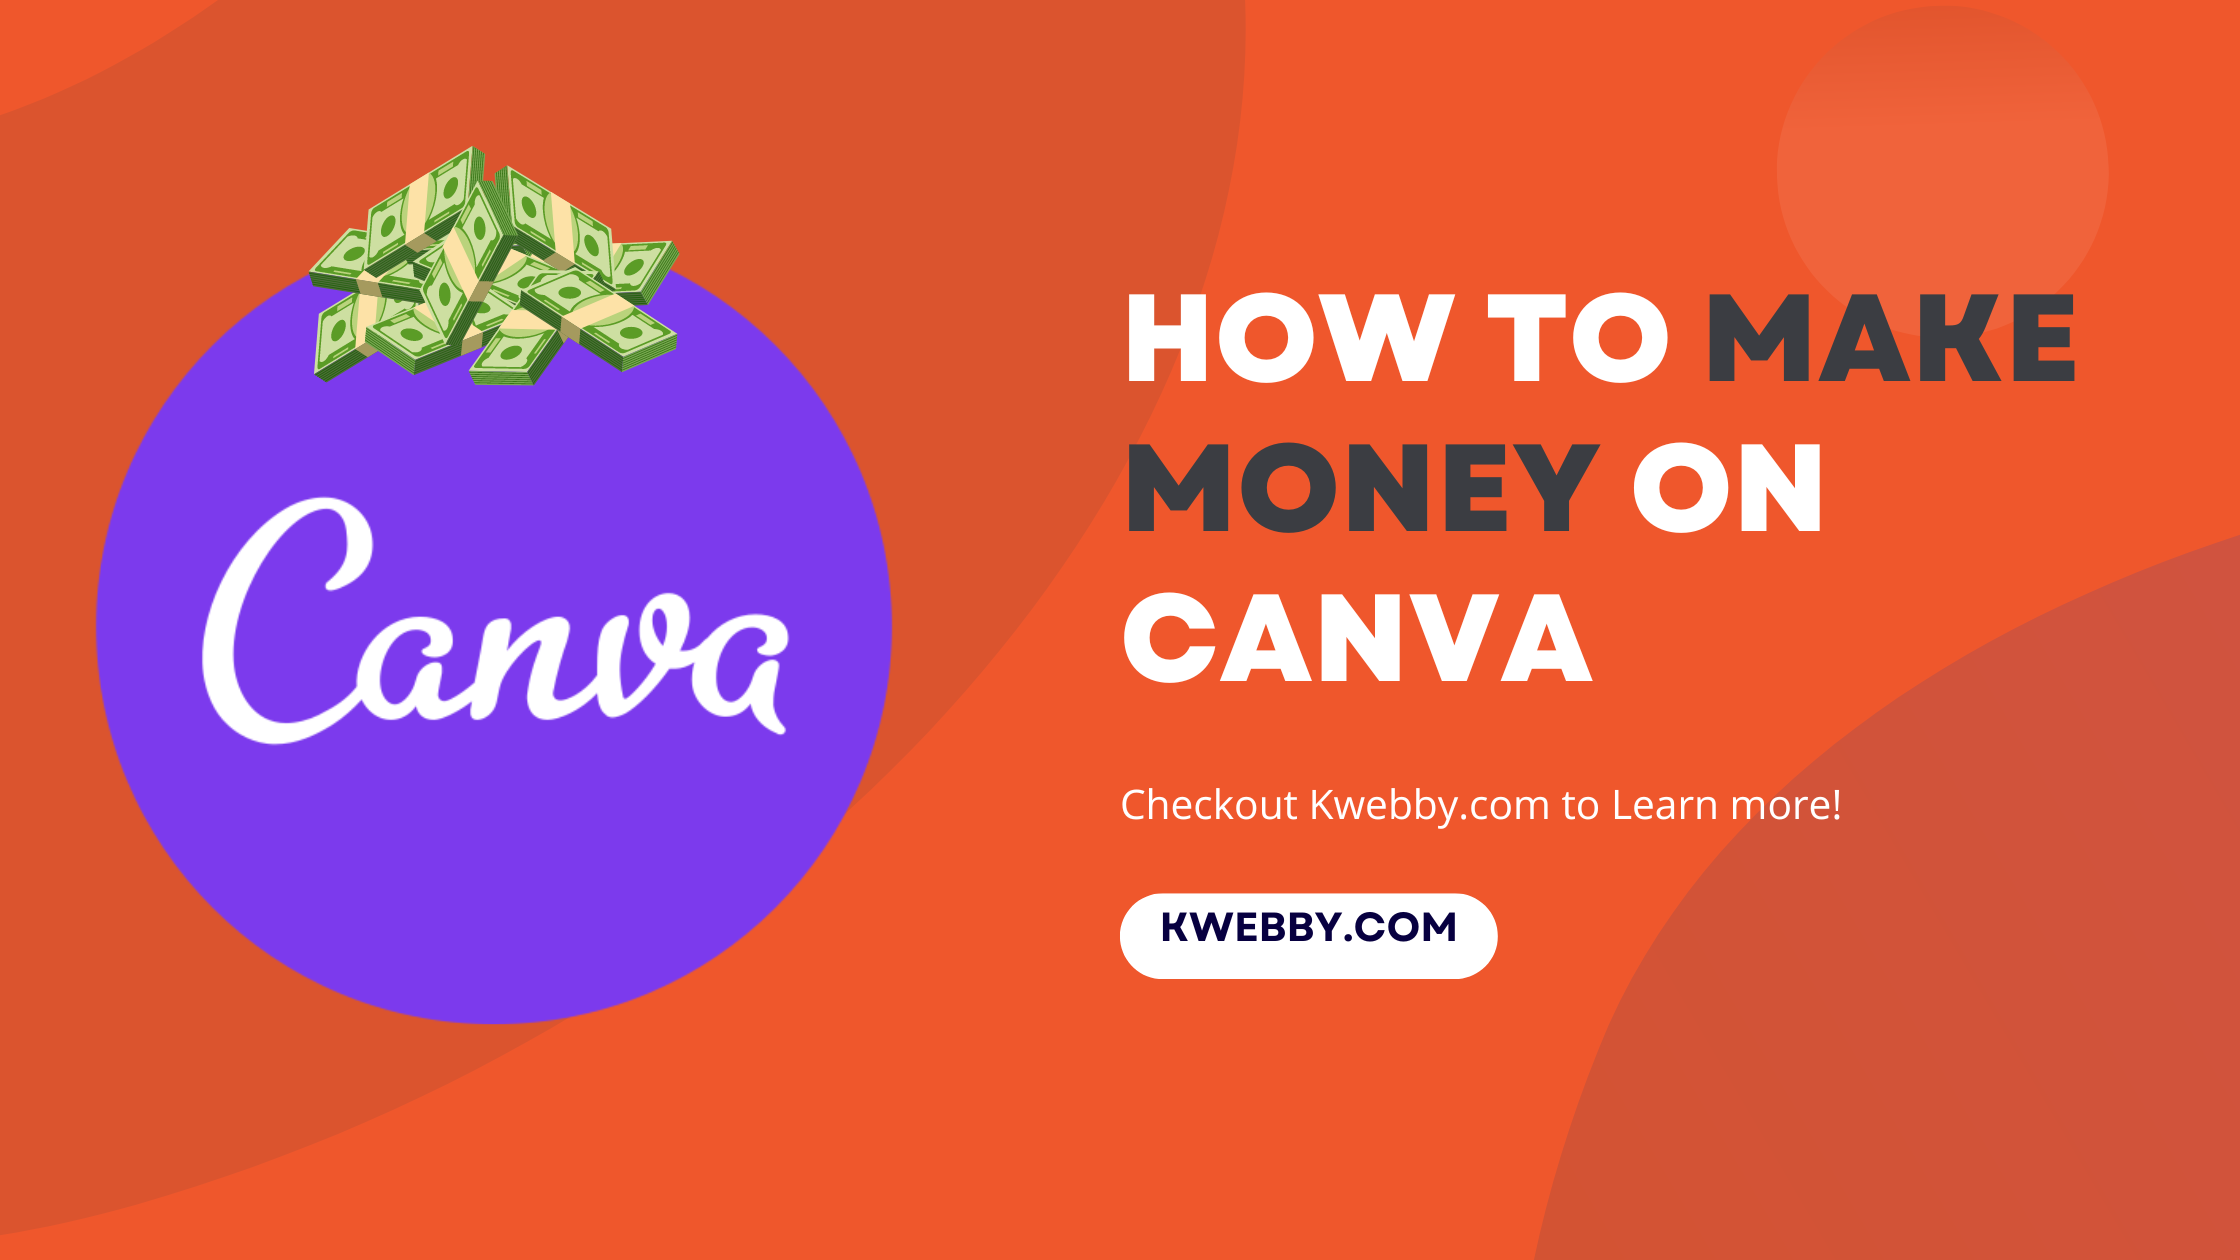 How to Make Money on Canva (11 Methods)